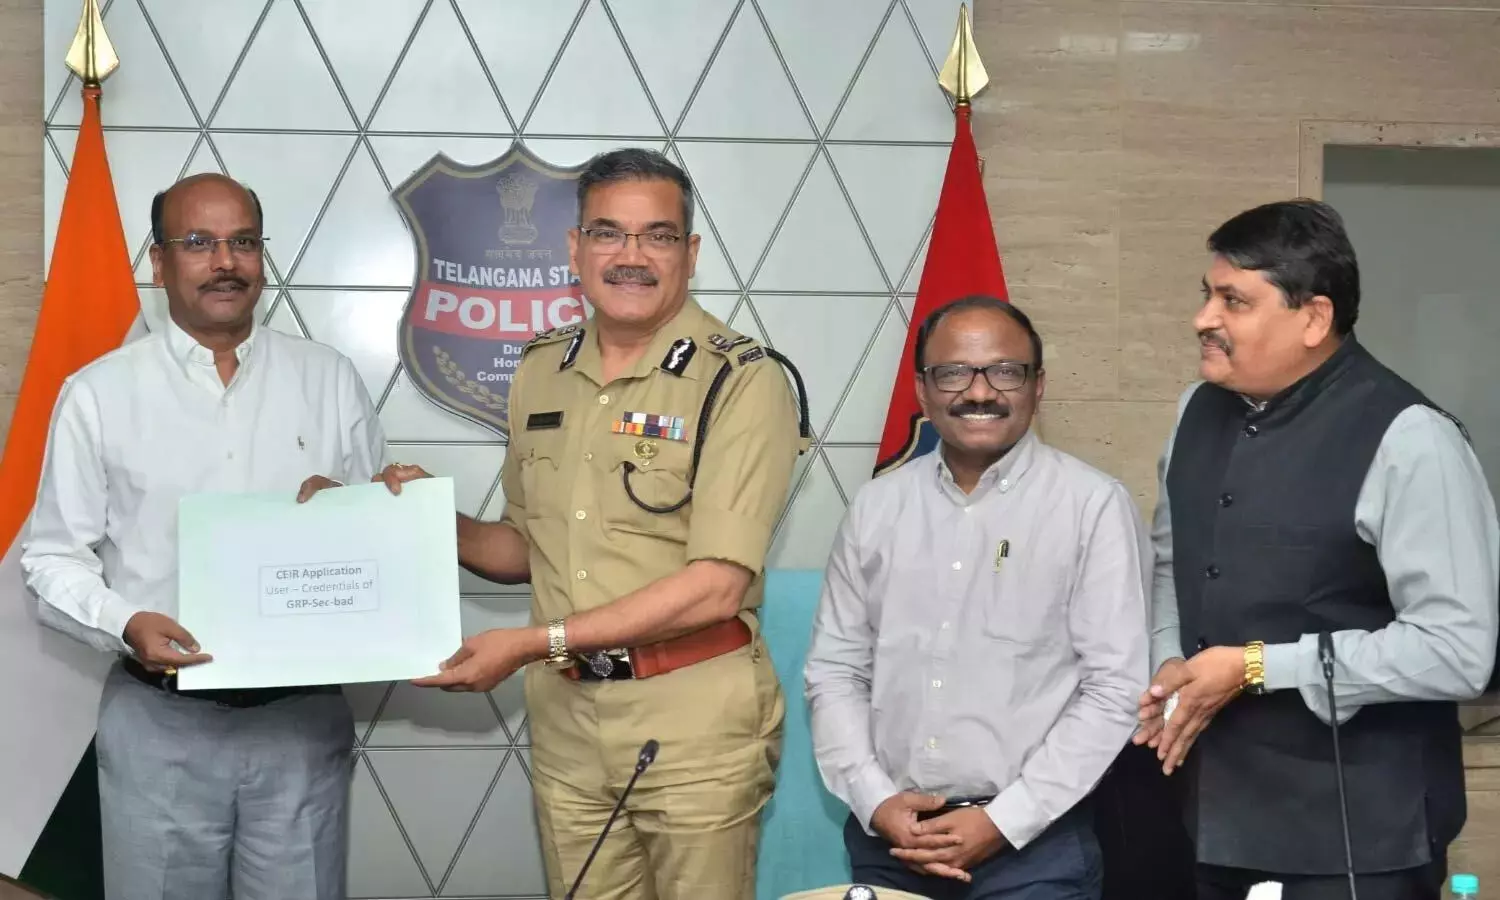 Thanks to CIER, Telangana police trace, unblock, return 1,000 lost phones in 30 days